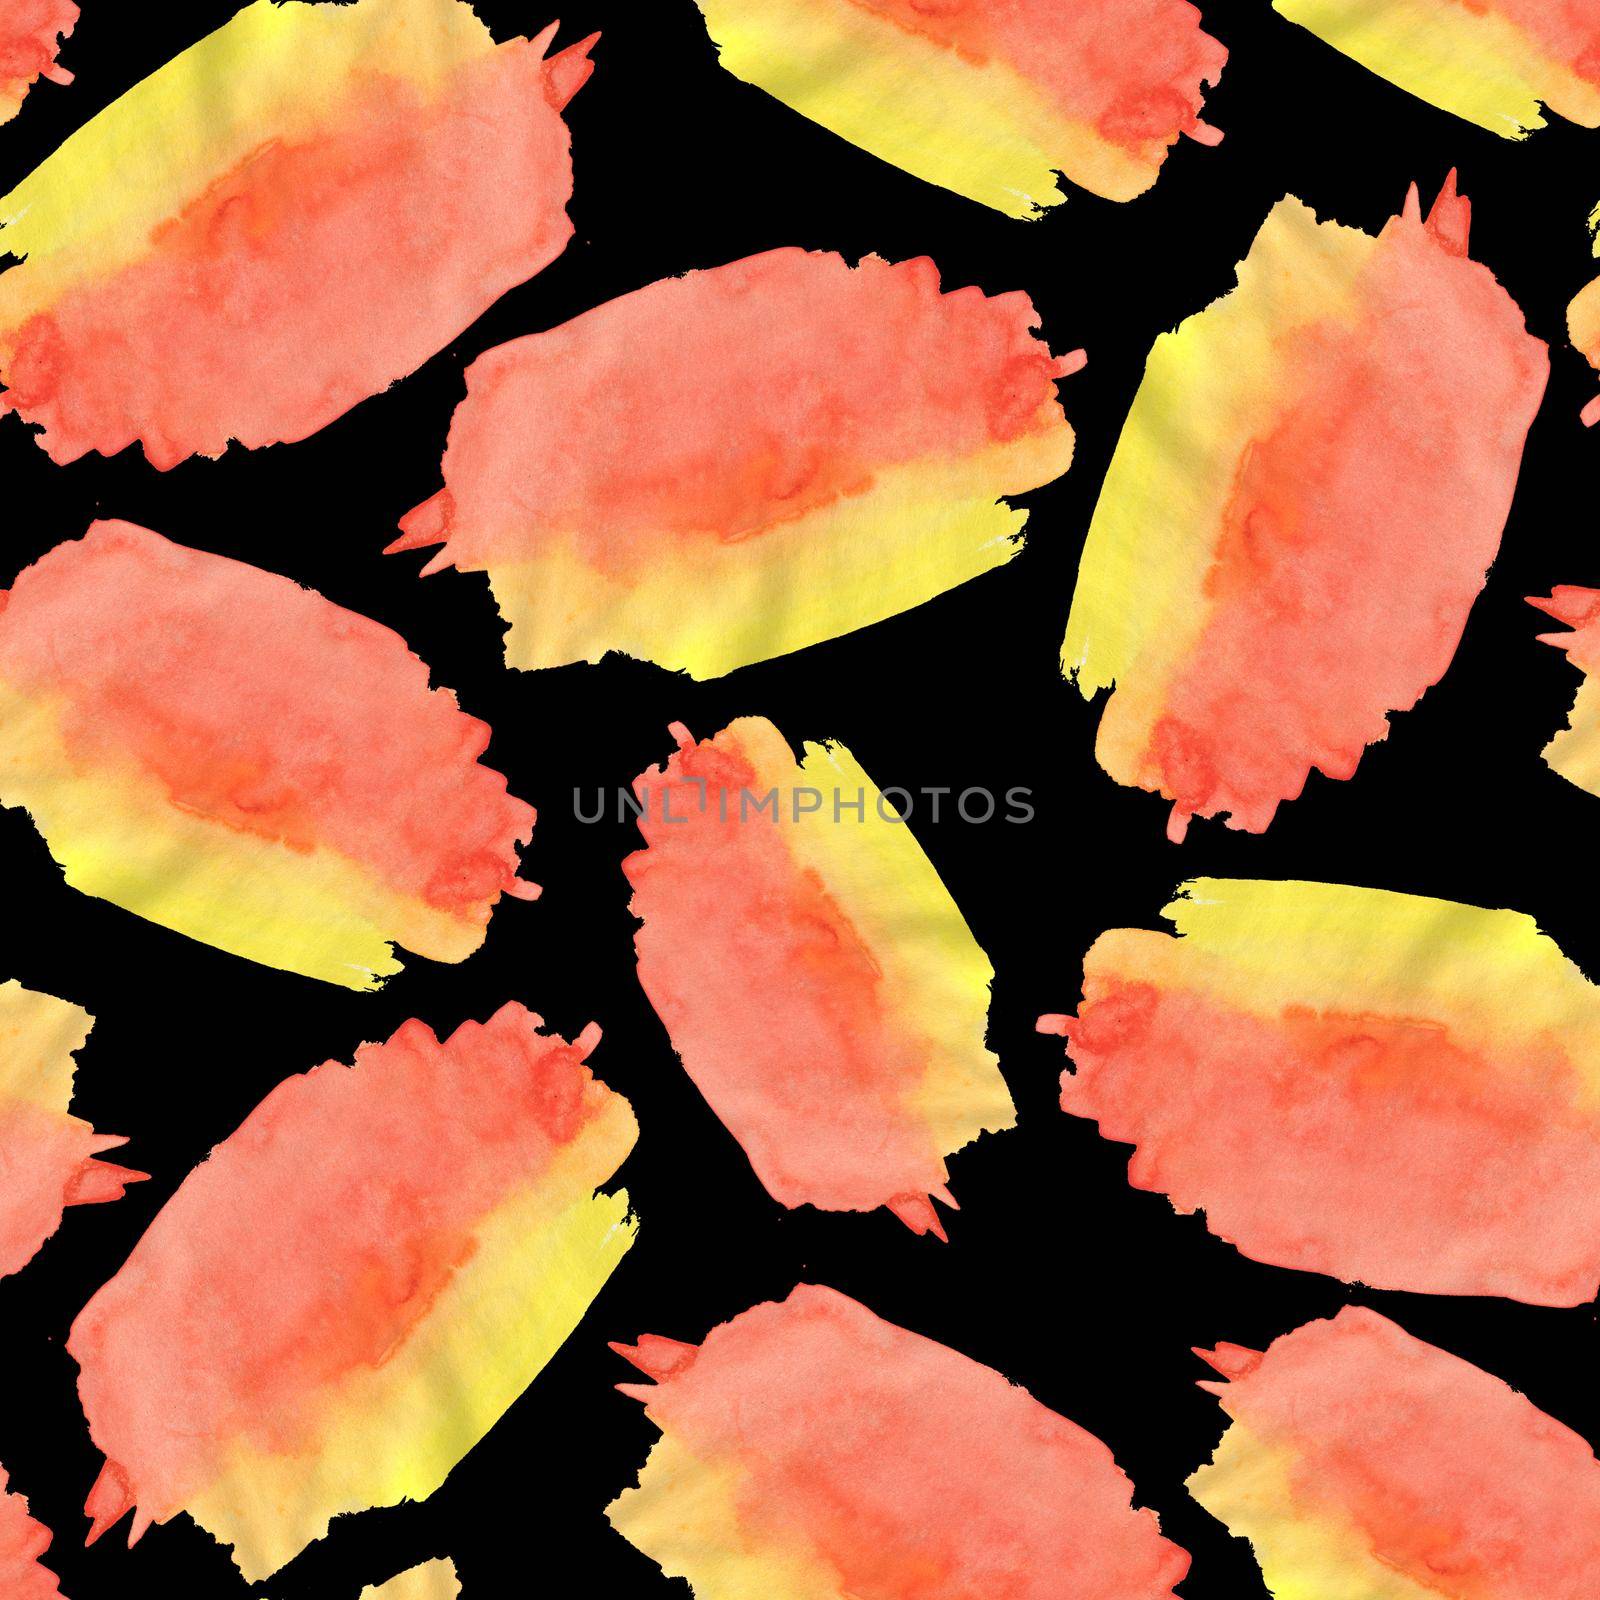 Seamless Pattern with Red and Yellow Watercolor Spots. Hand Drawn Blobs on Black Background.